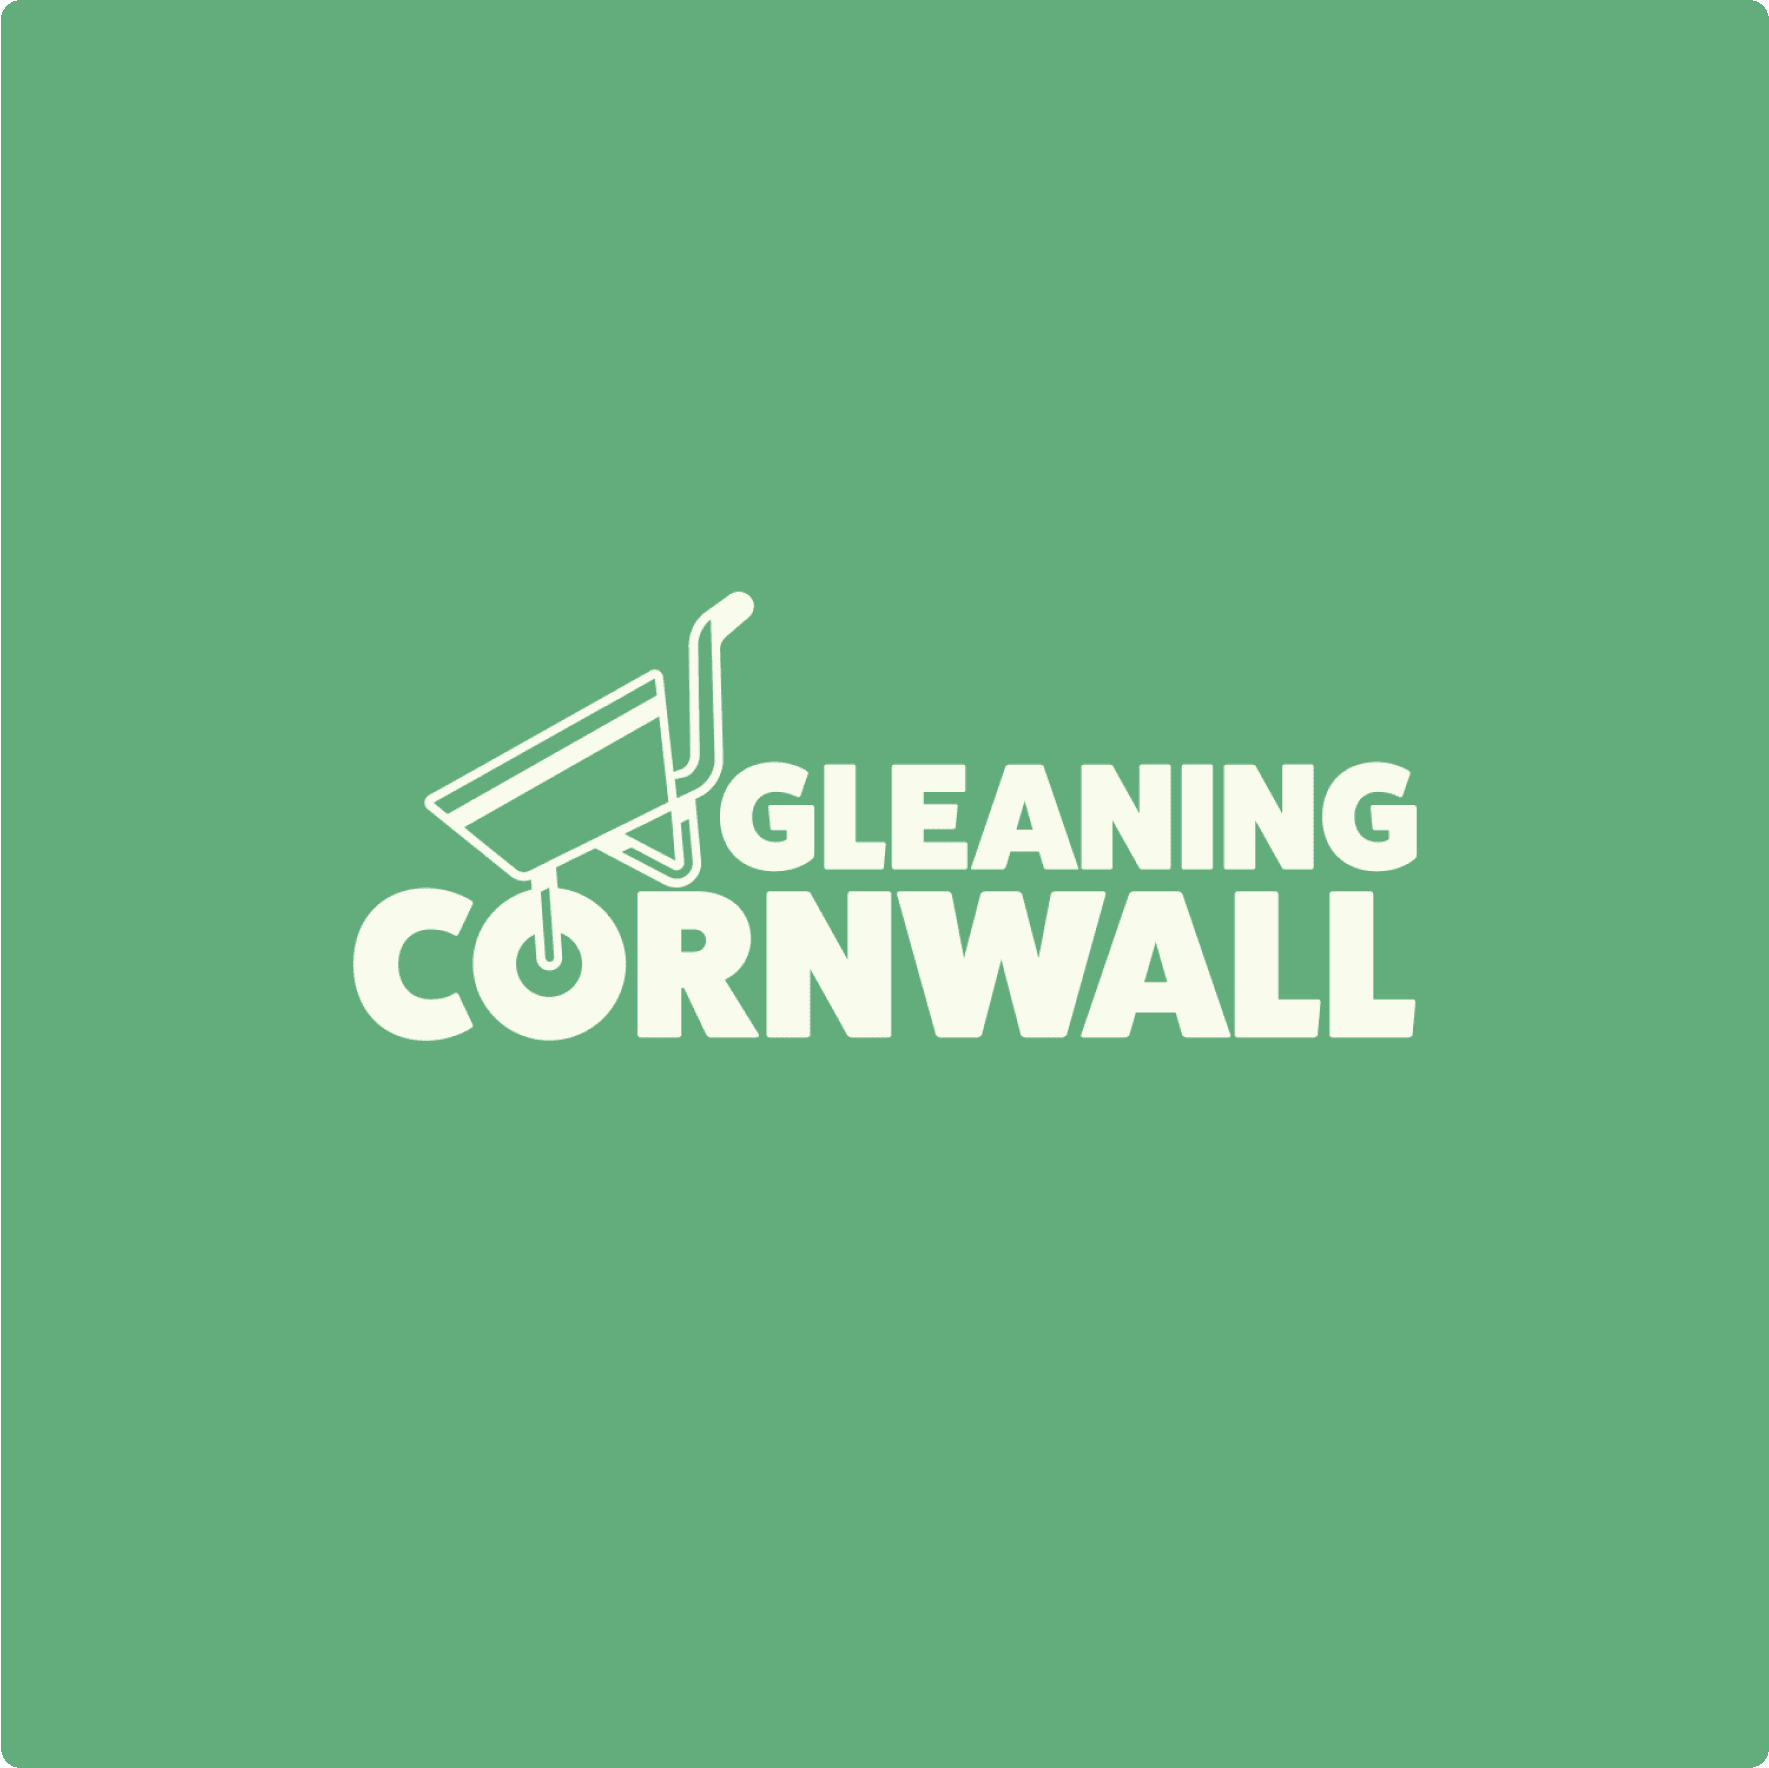 Gleaning Cornwall logo with green background